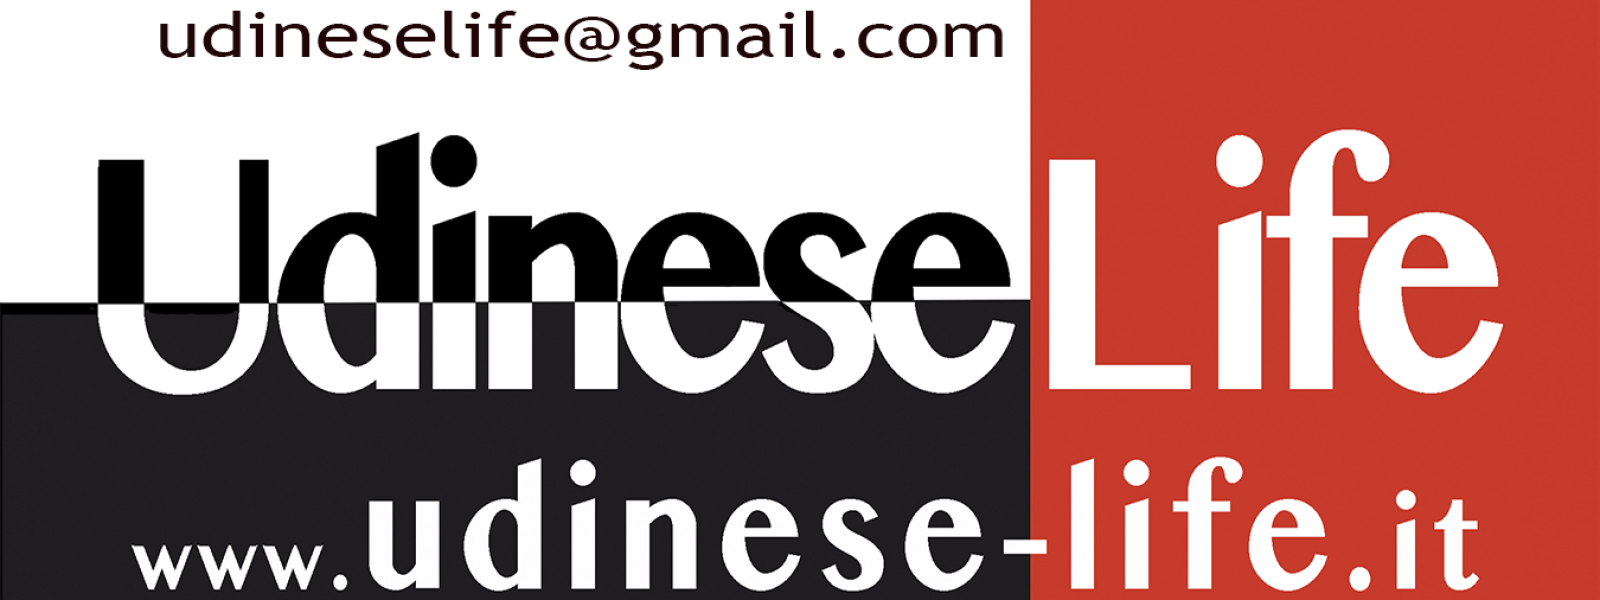 udinese-life-logo-copy-copia-1.png